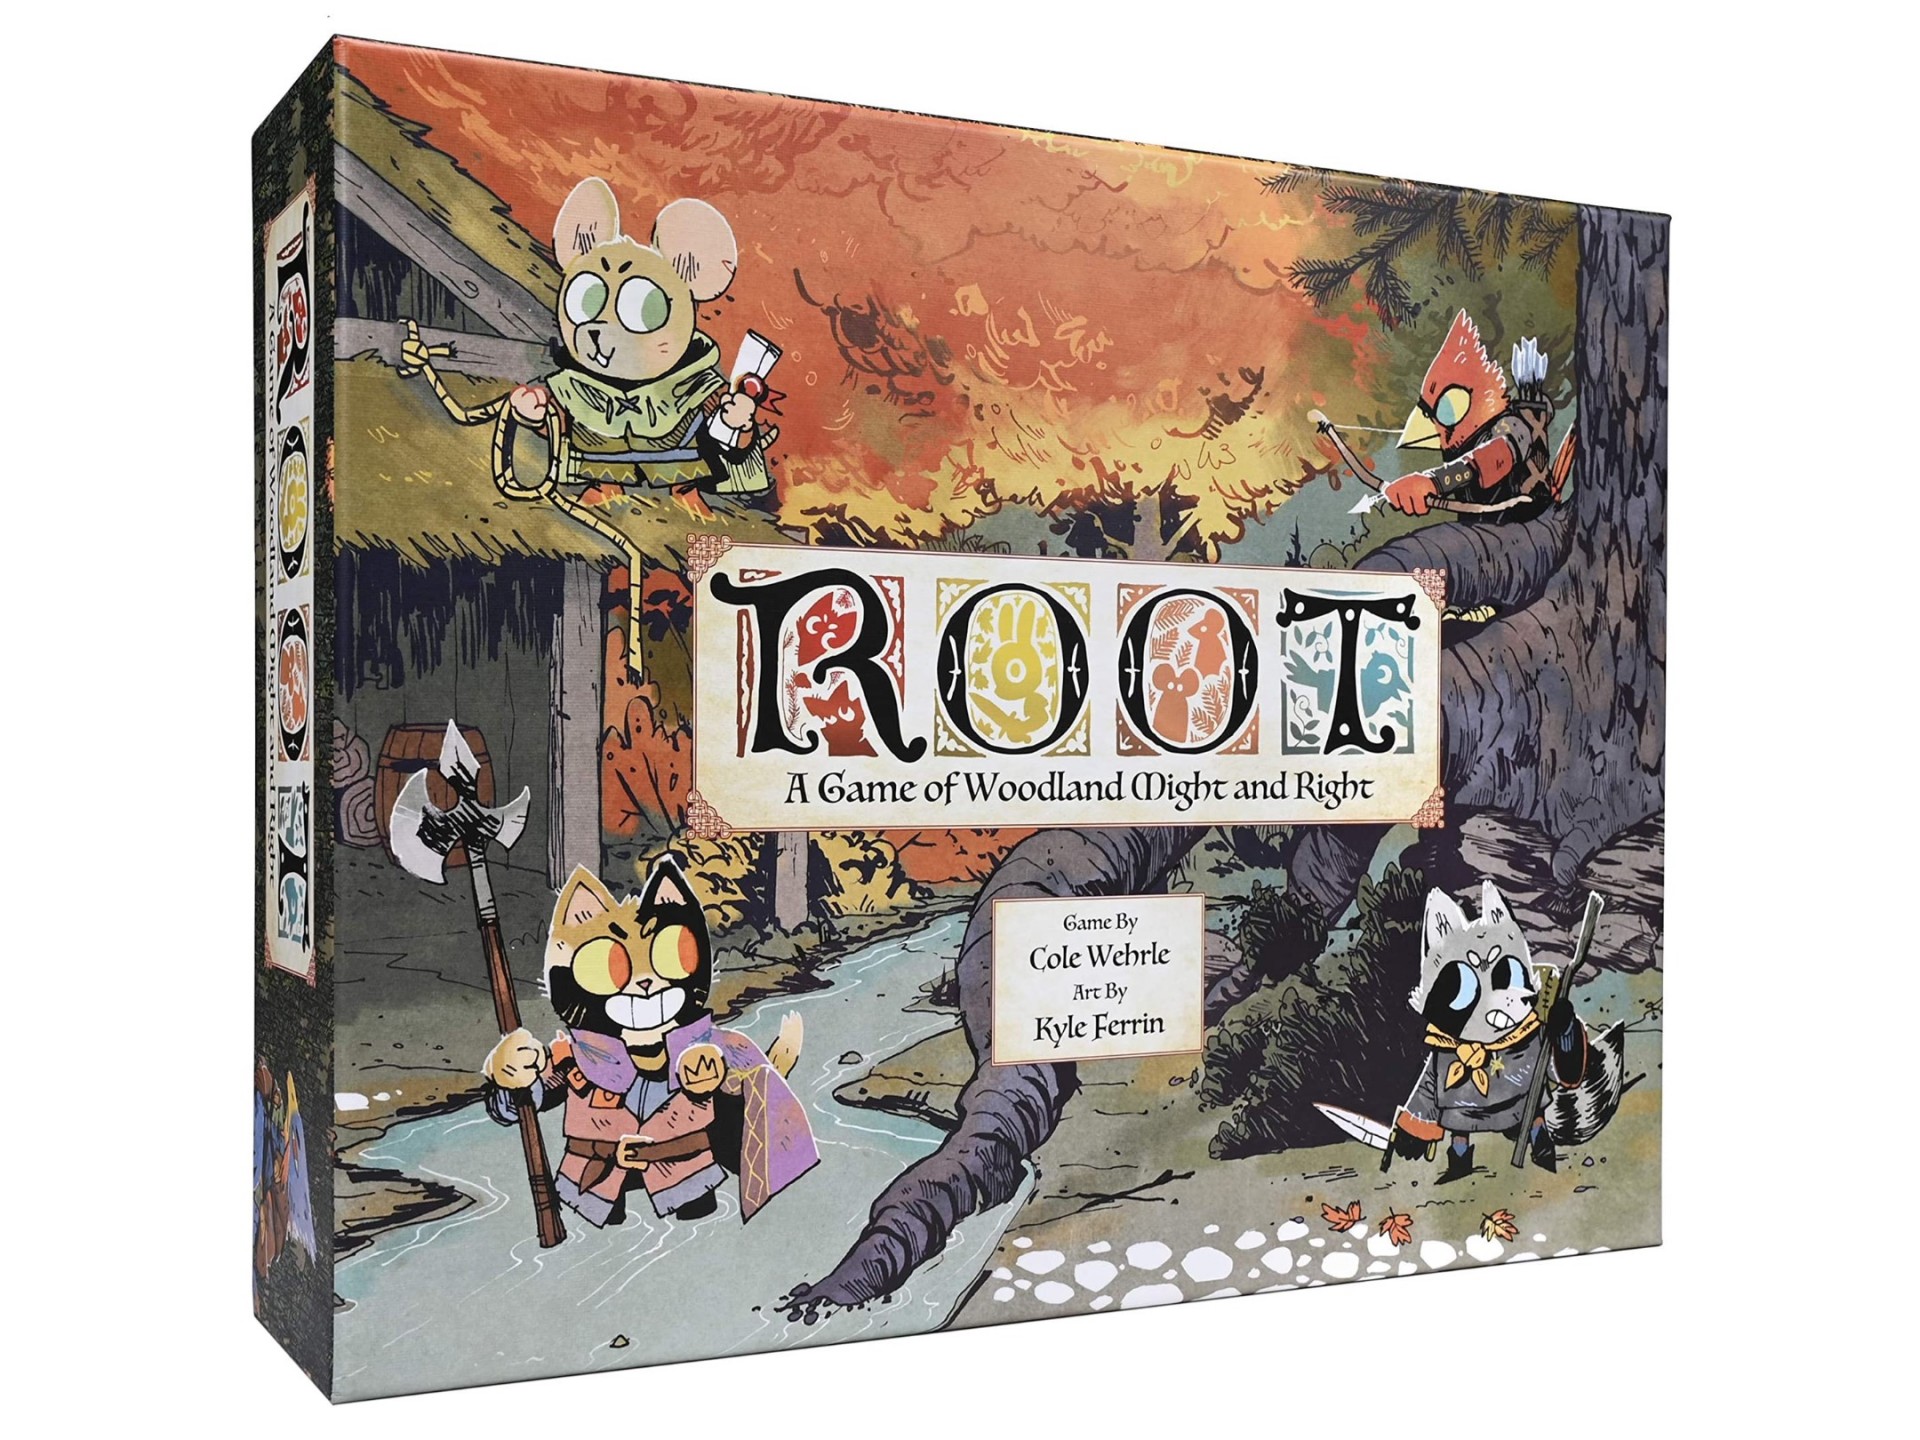 Root: a Game of Woodland Might and Right board game. ($75 for base game; expansions also available)